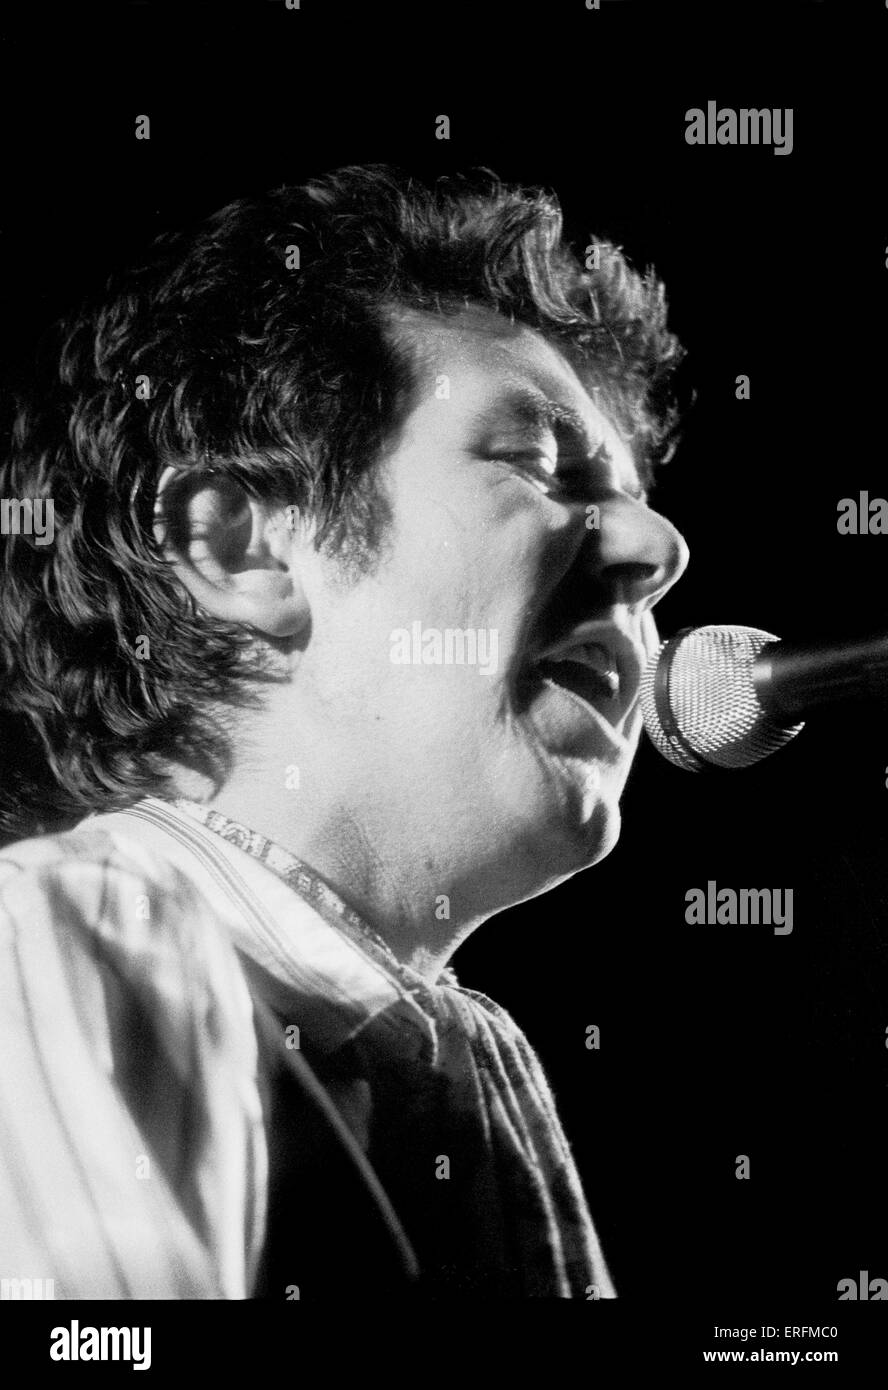 Ronnie Lane - portrait of the English singer & bass player performing in London, 1980. Singing. 1946-1997. Nicknamed 'Plonk'. Stock Photo